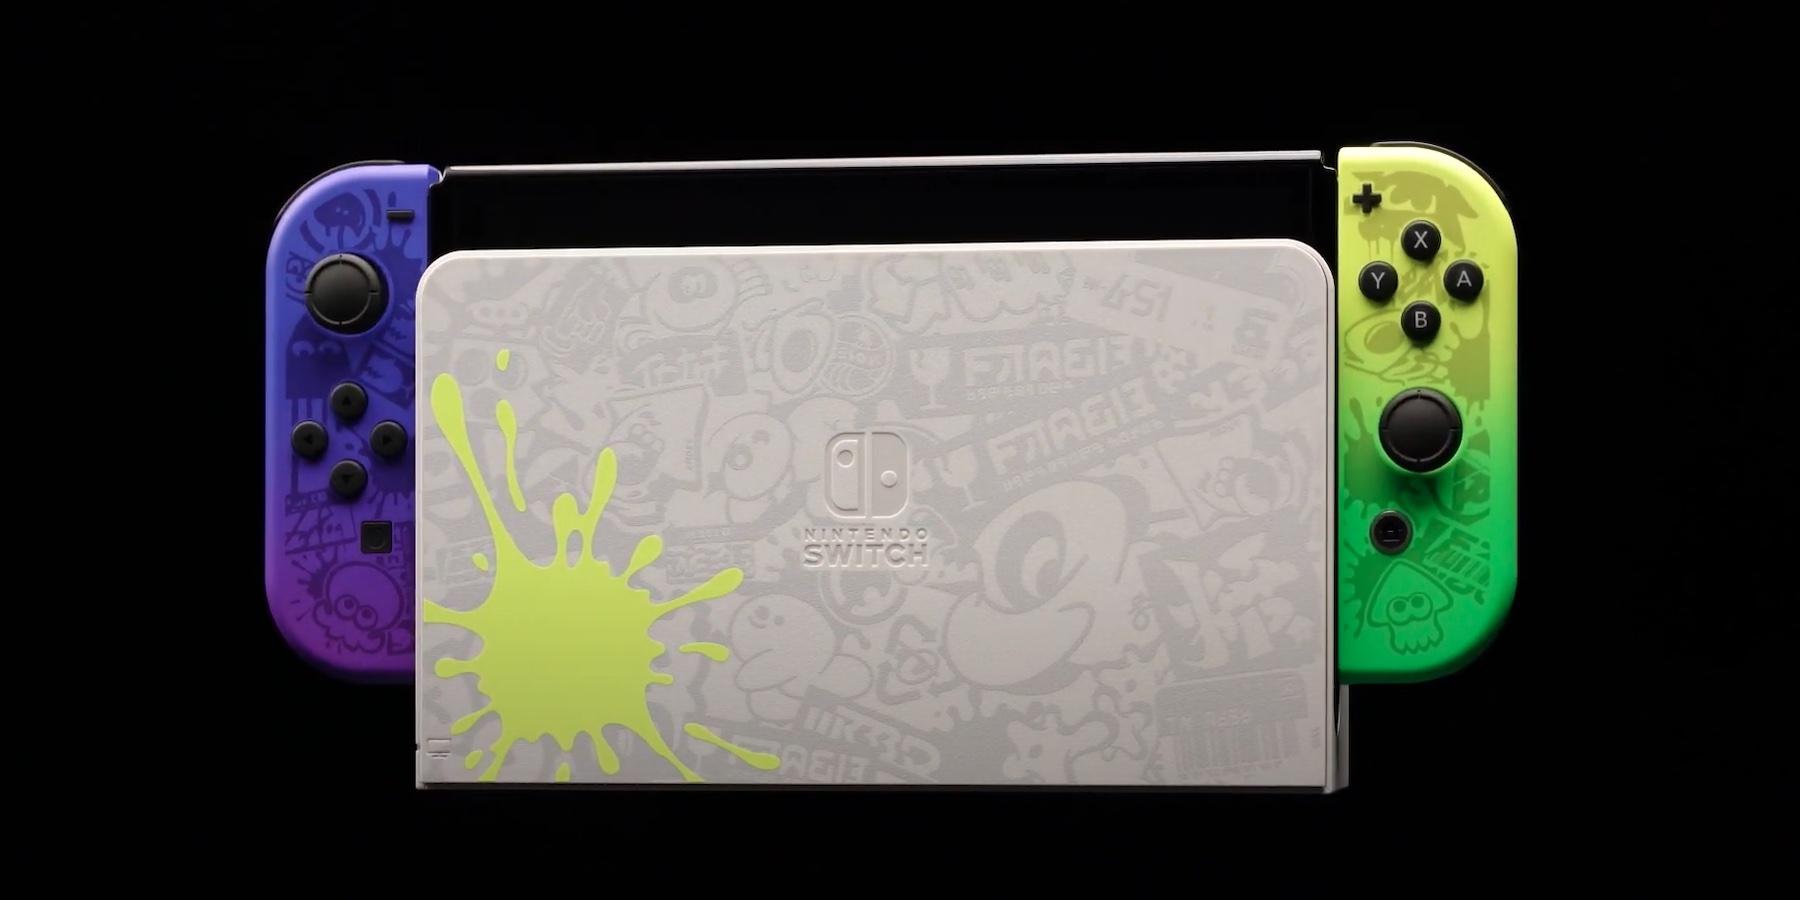  Nintendo Switch – OLED Model Splatoon 3 Special Edition : Video  Games